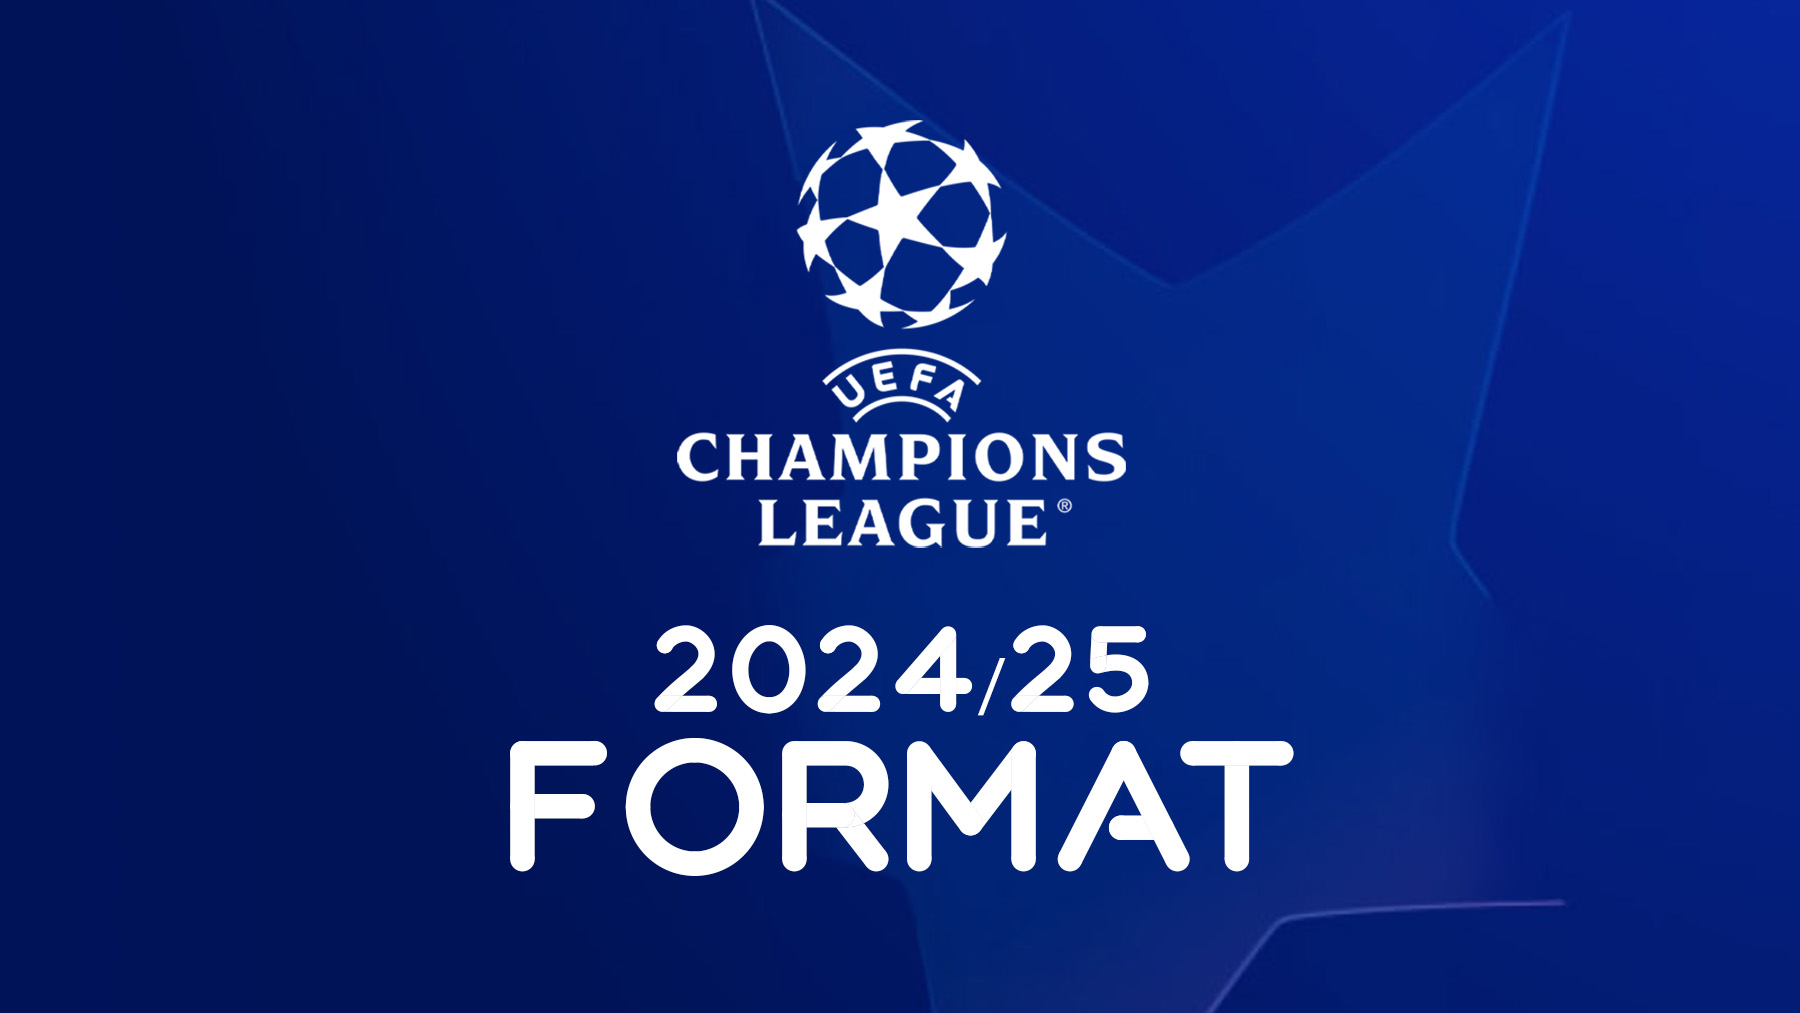 Champions League 2024/25 New Format